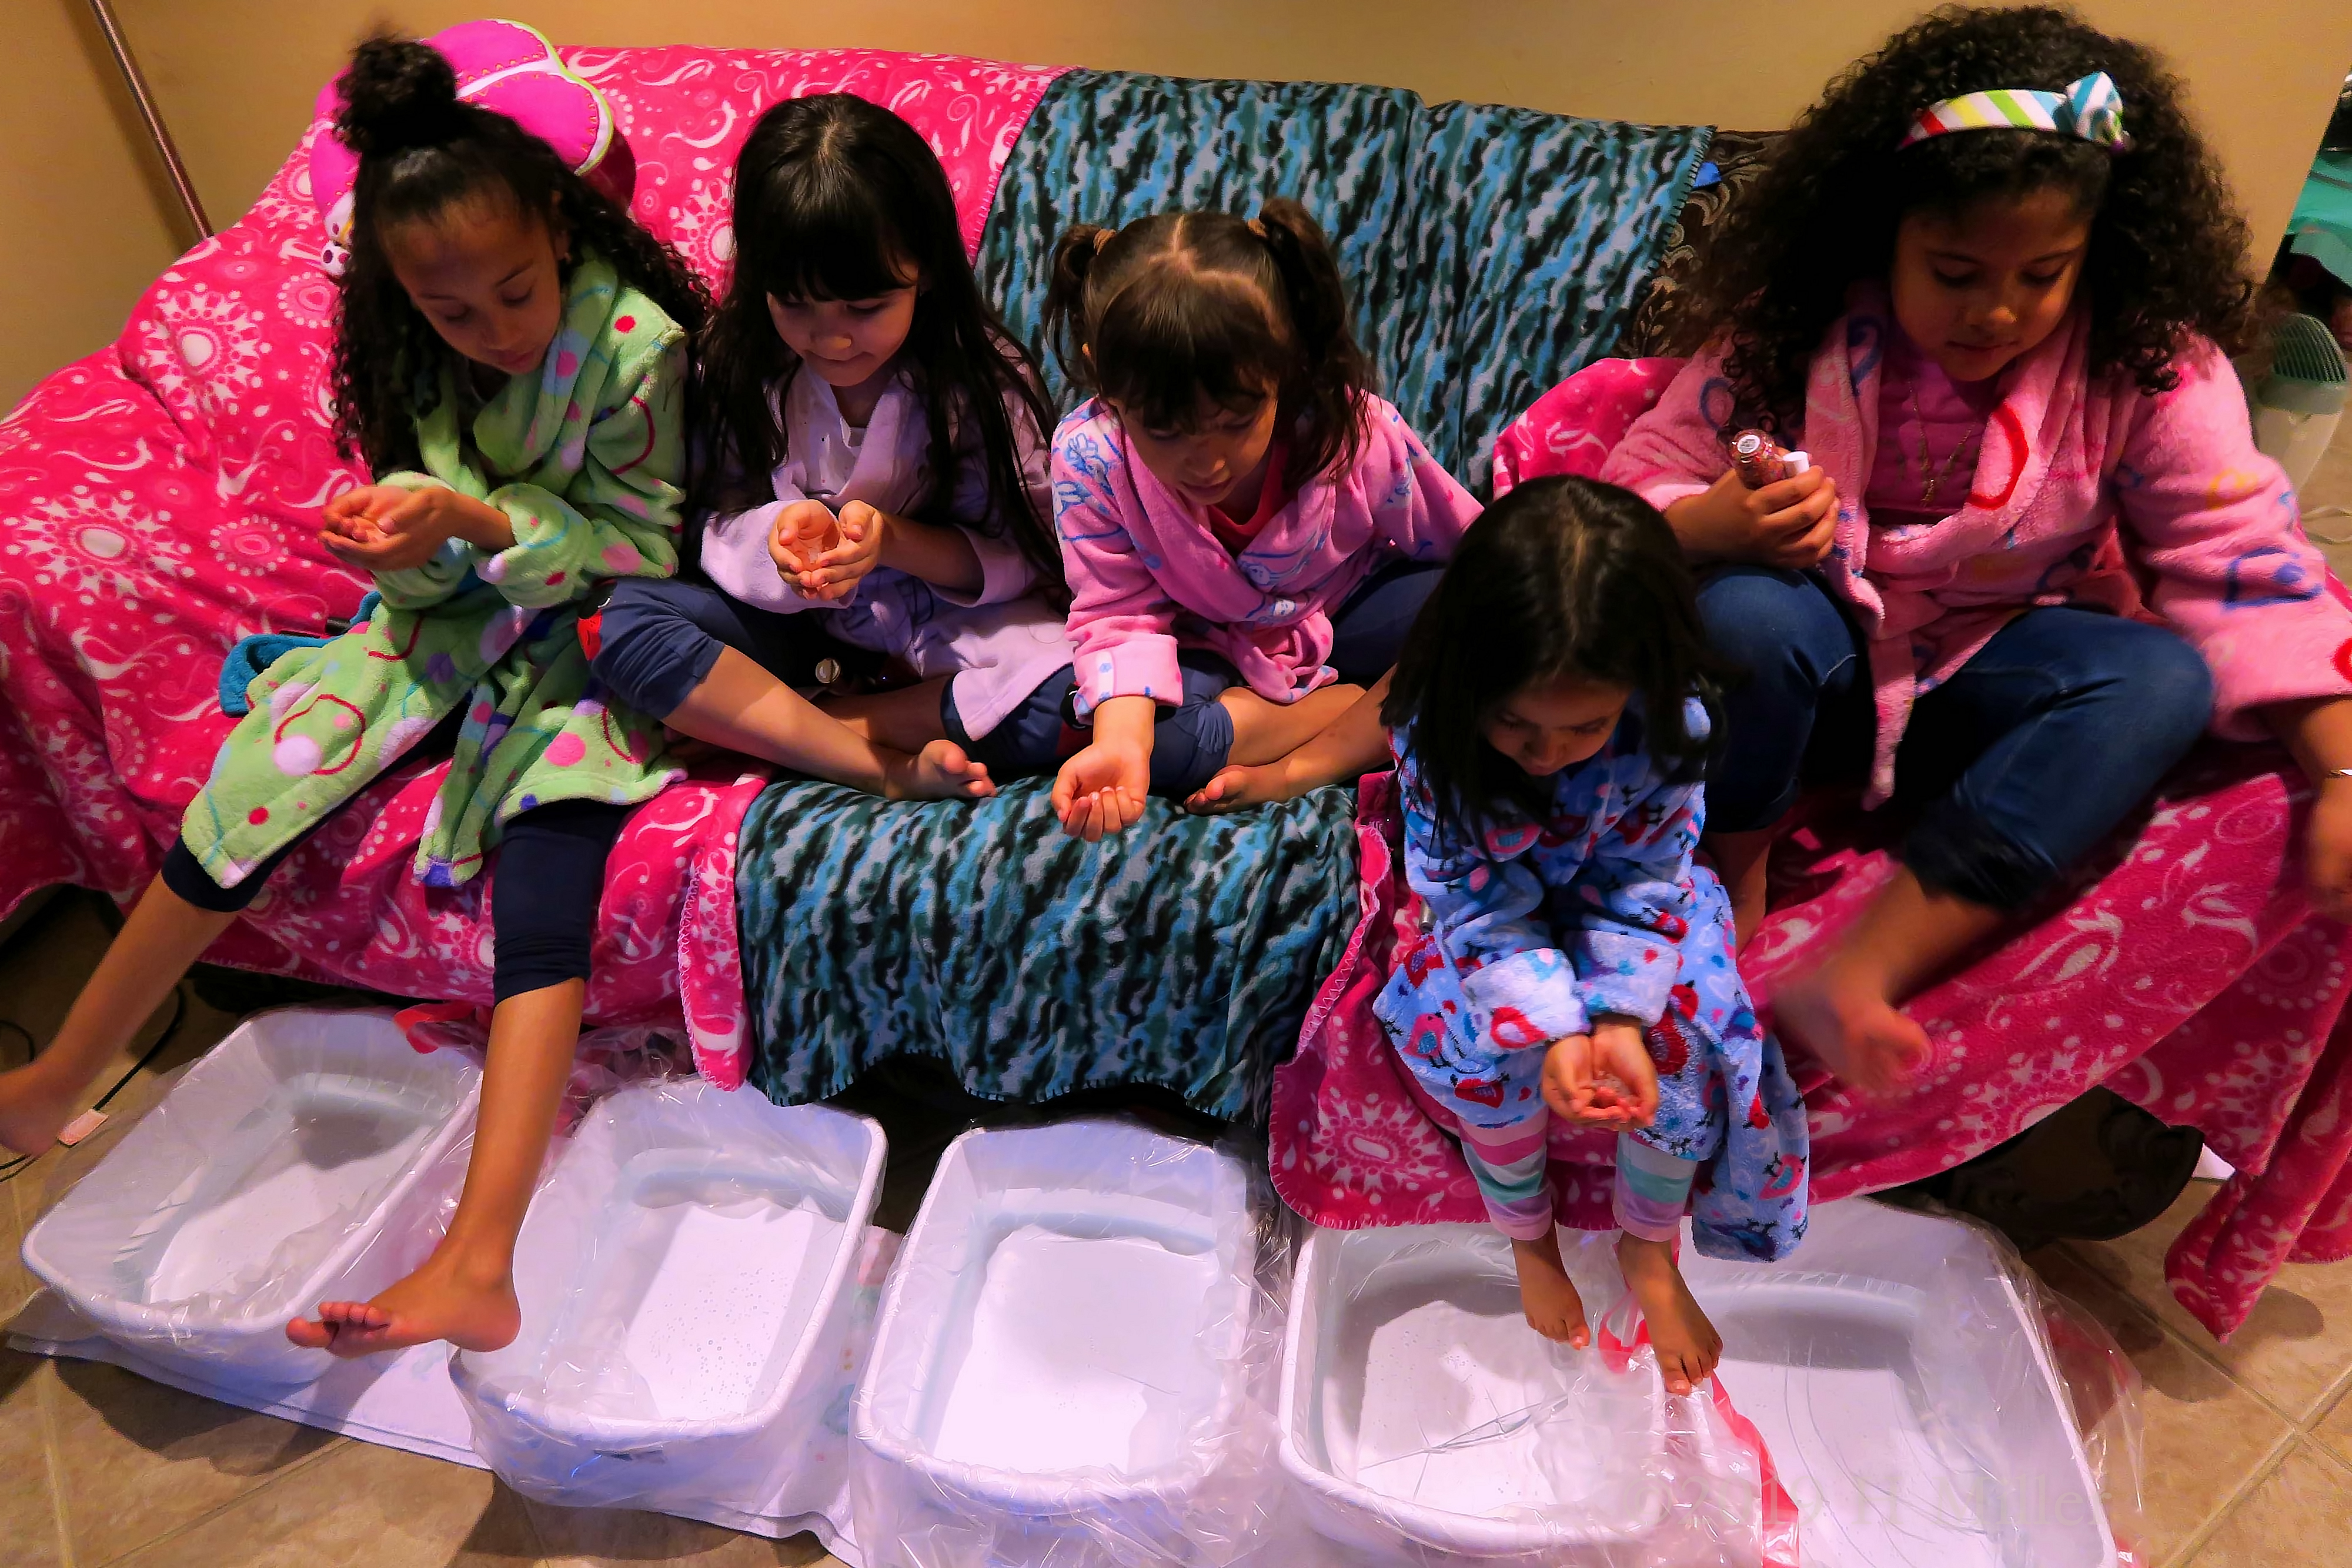 Party Guests Sitting On The Couch Having Pedicures For Girls! 4